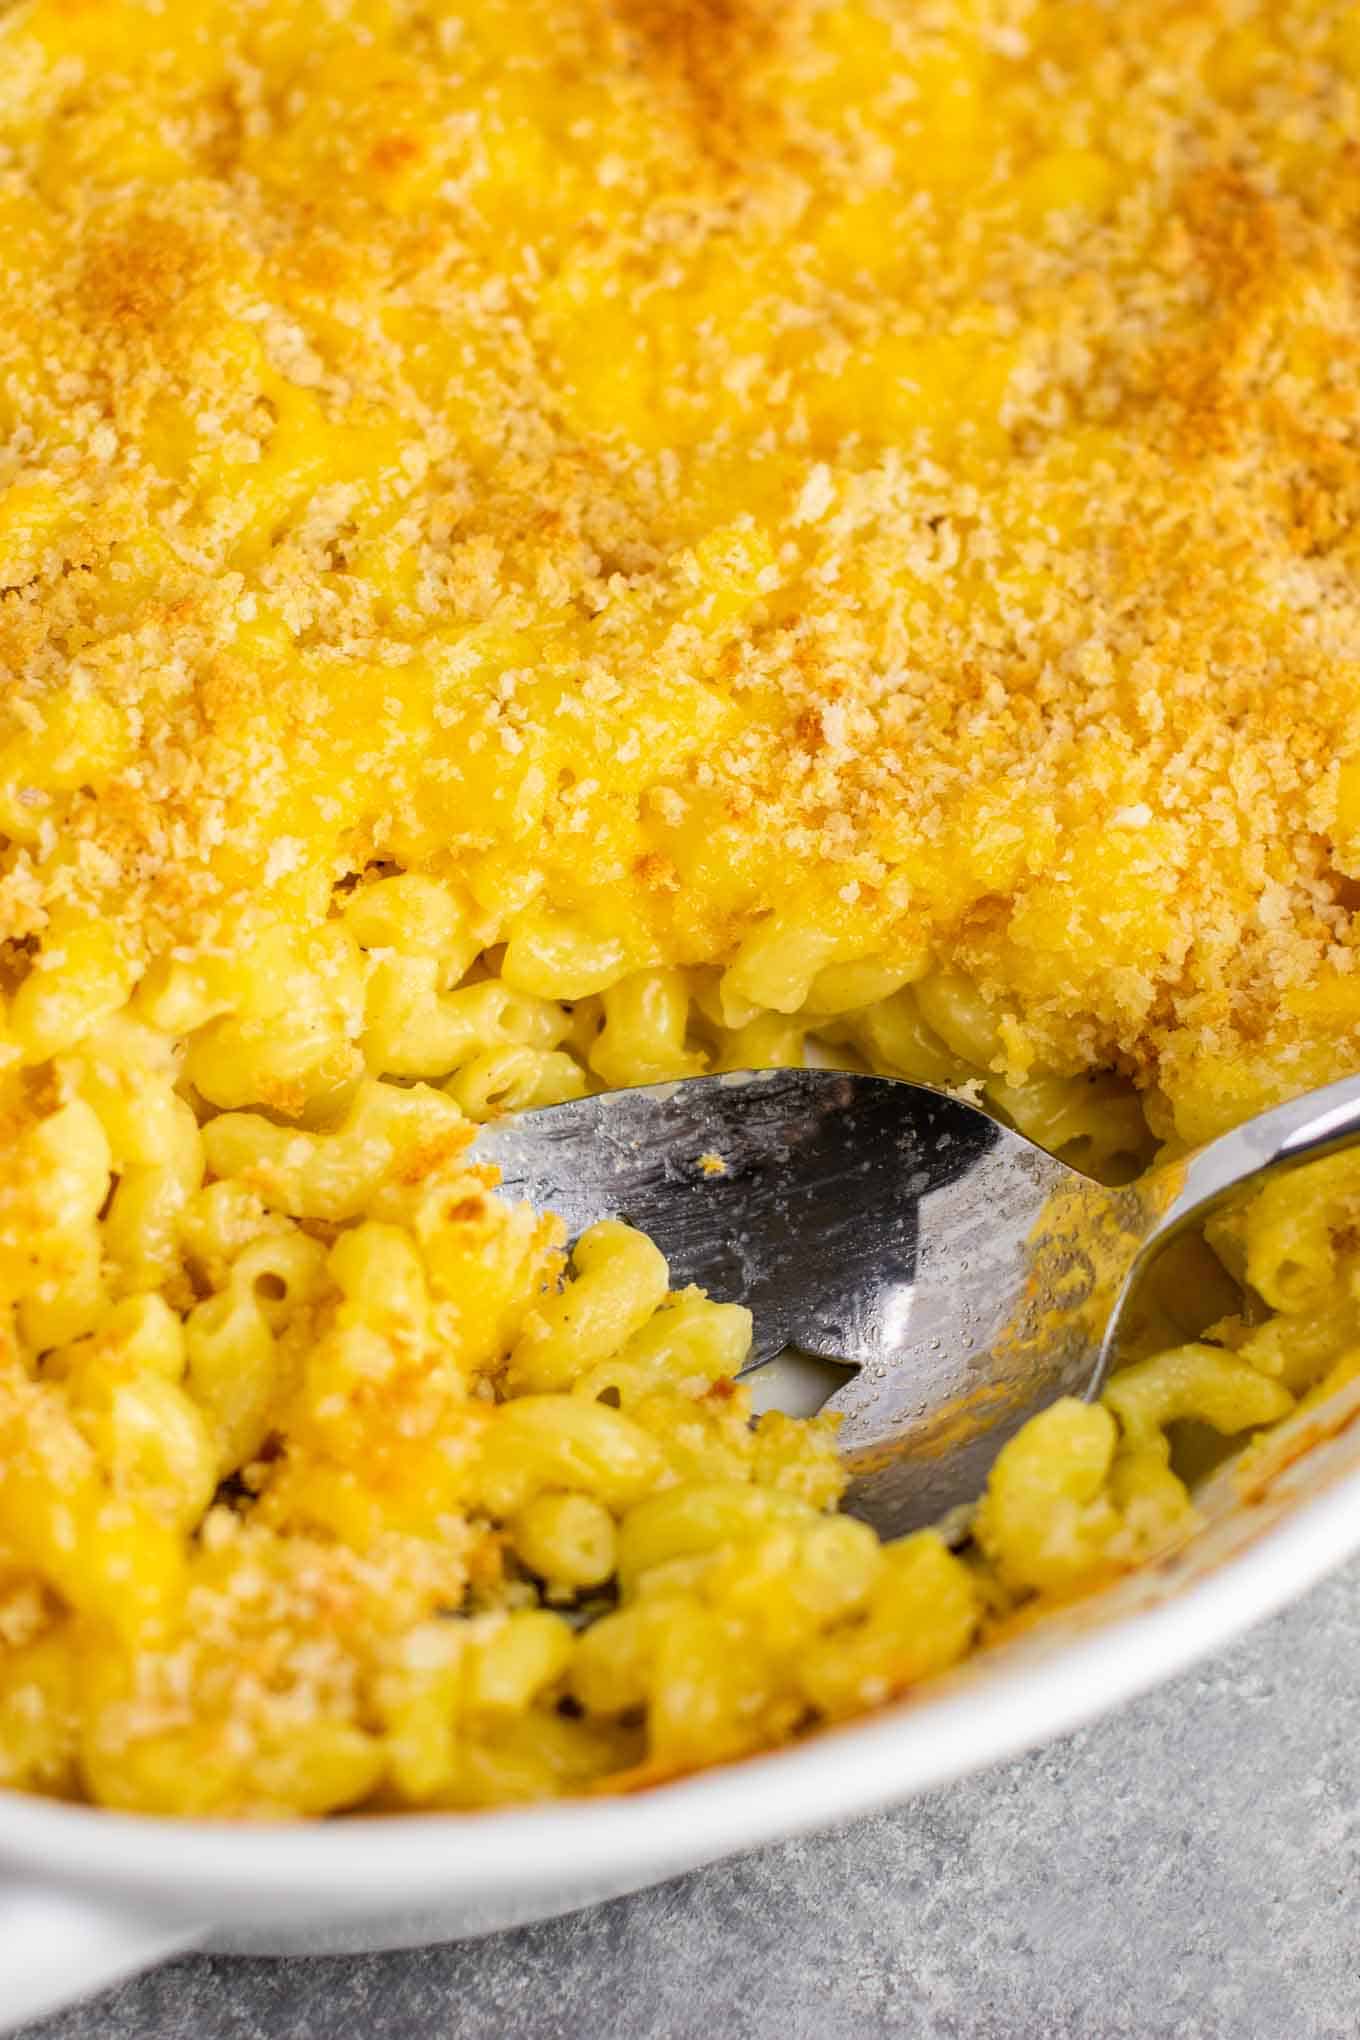 Baked Mac and Cheese - Classic baked comfort food that the whole family will love! #macaroniandcheese #bakedmacaroniandcheese #comfortfood #sidedish #macandcheese #soulfood 